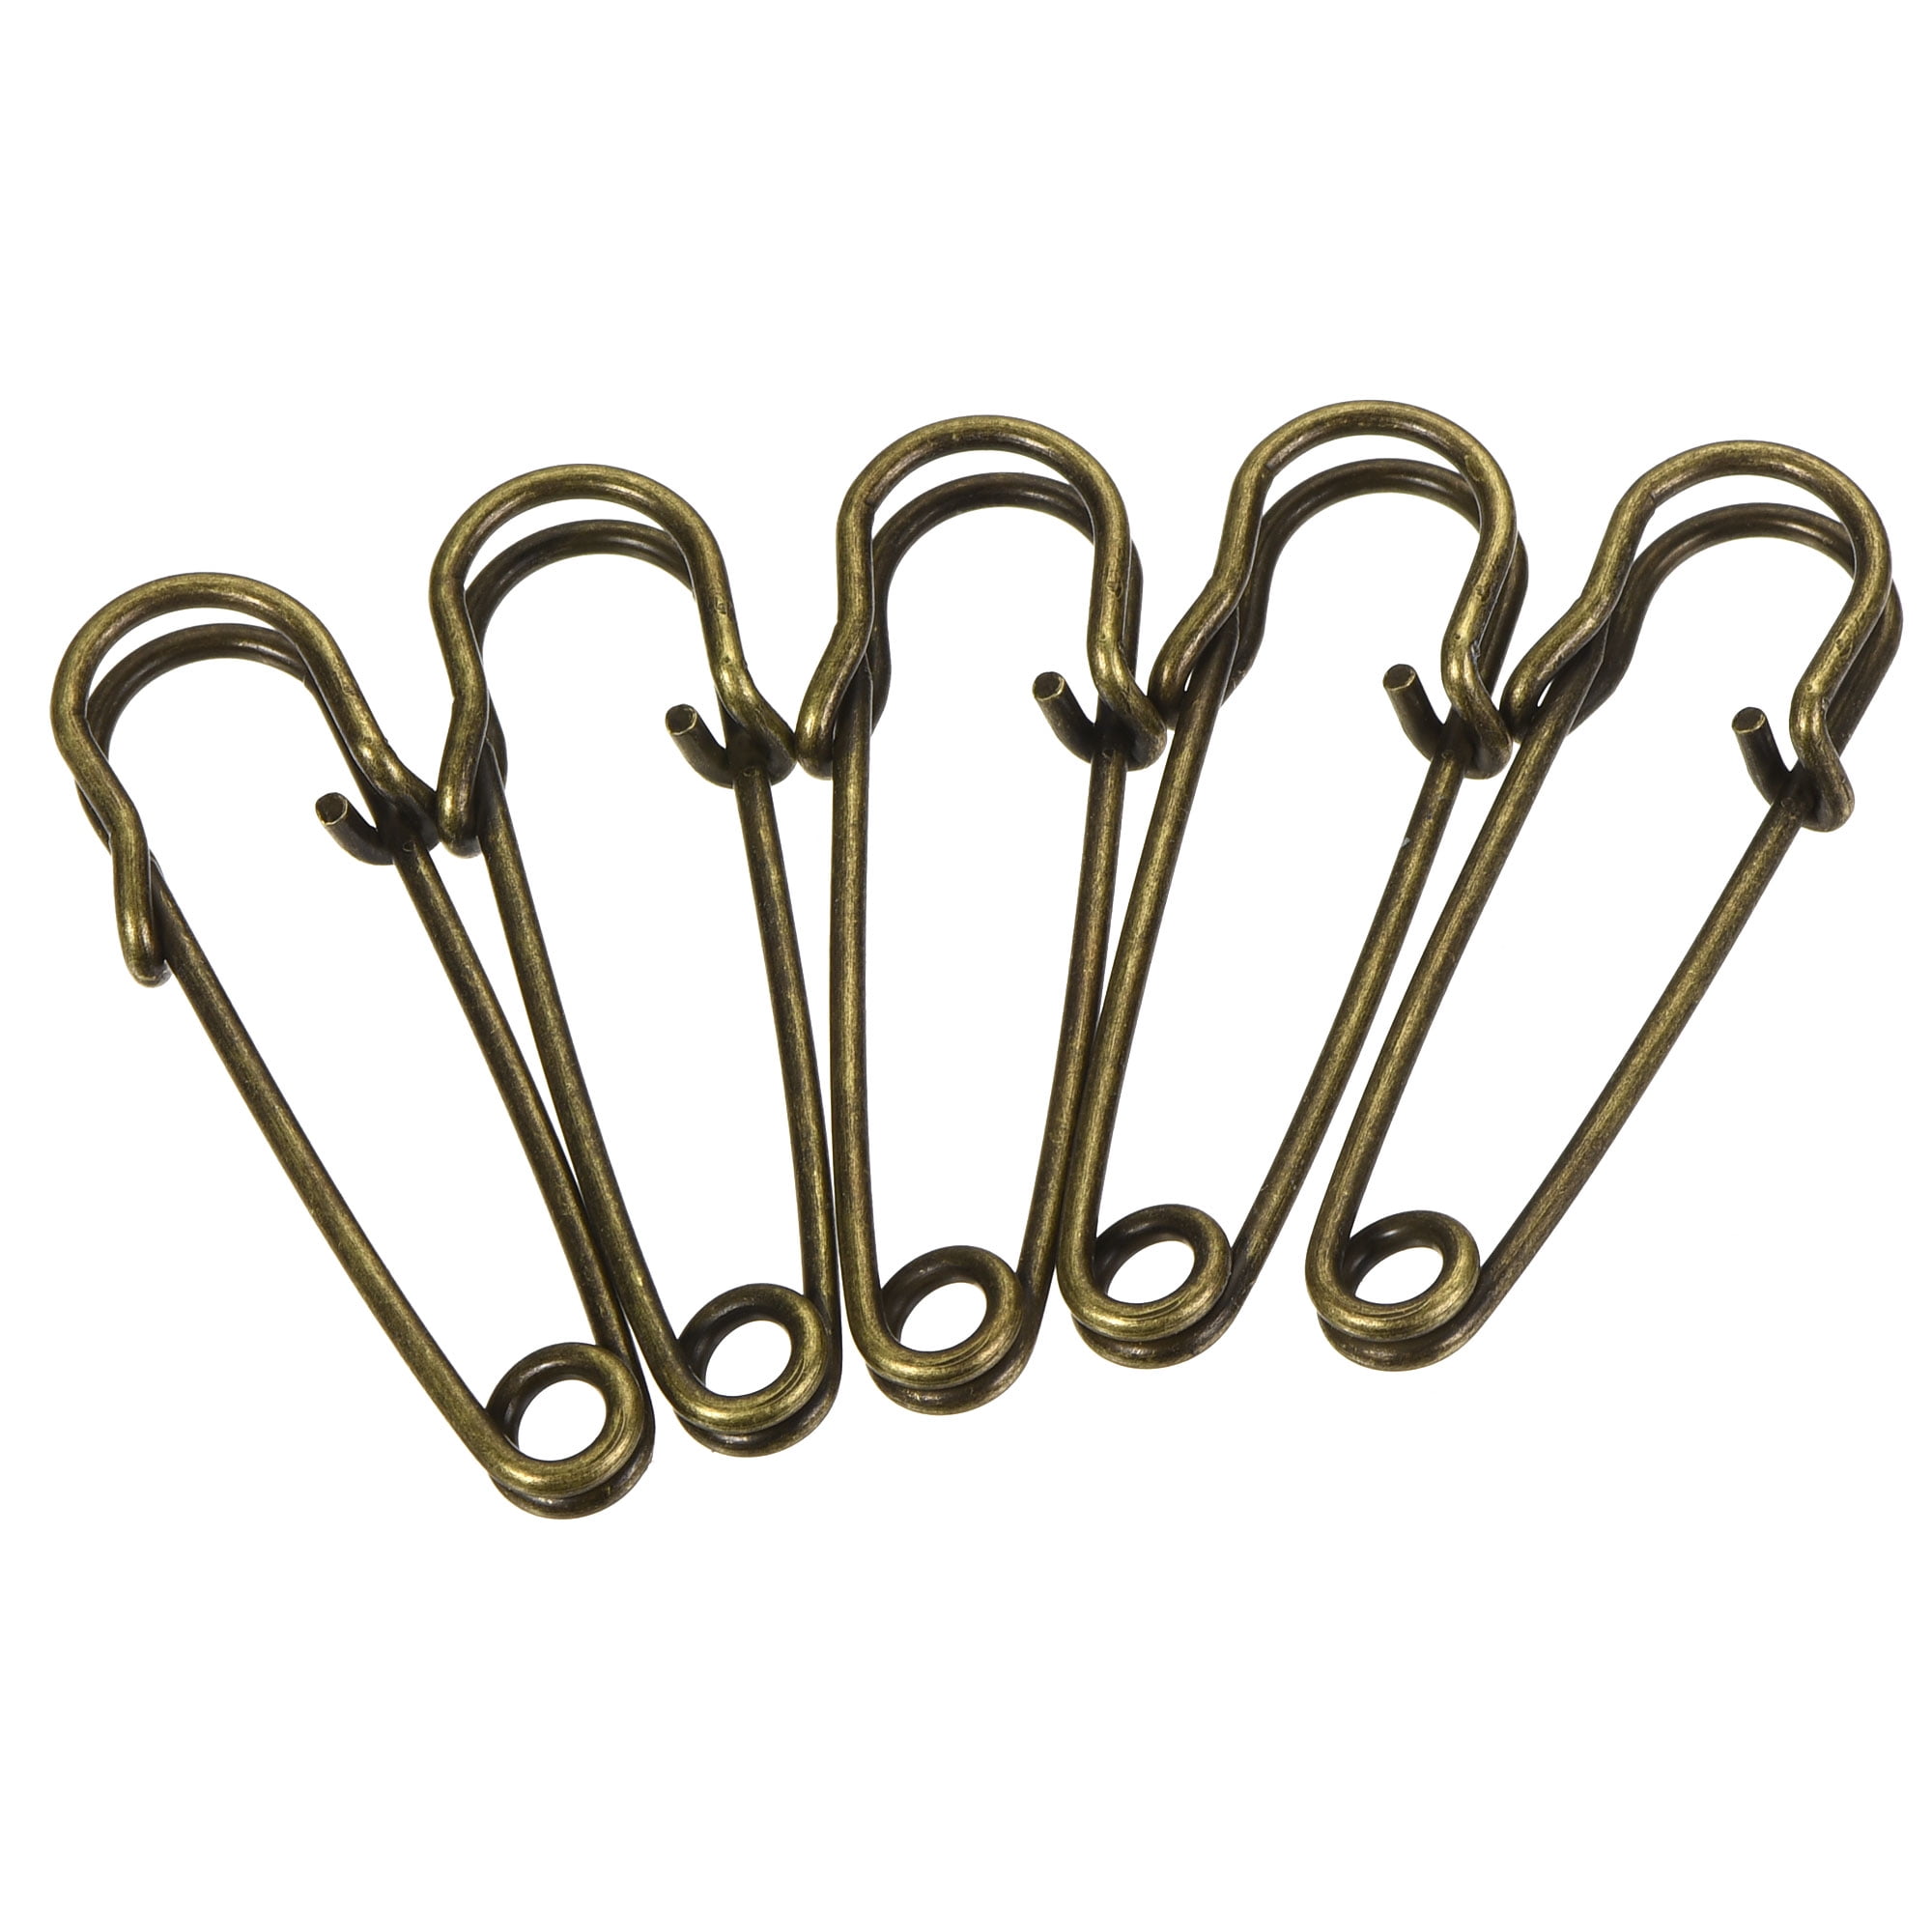 Singer Assorted Safety Pins